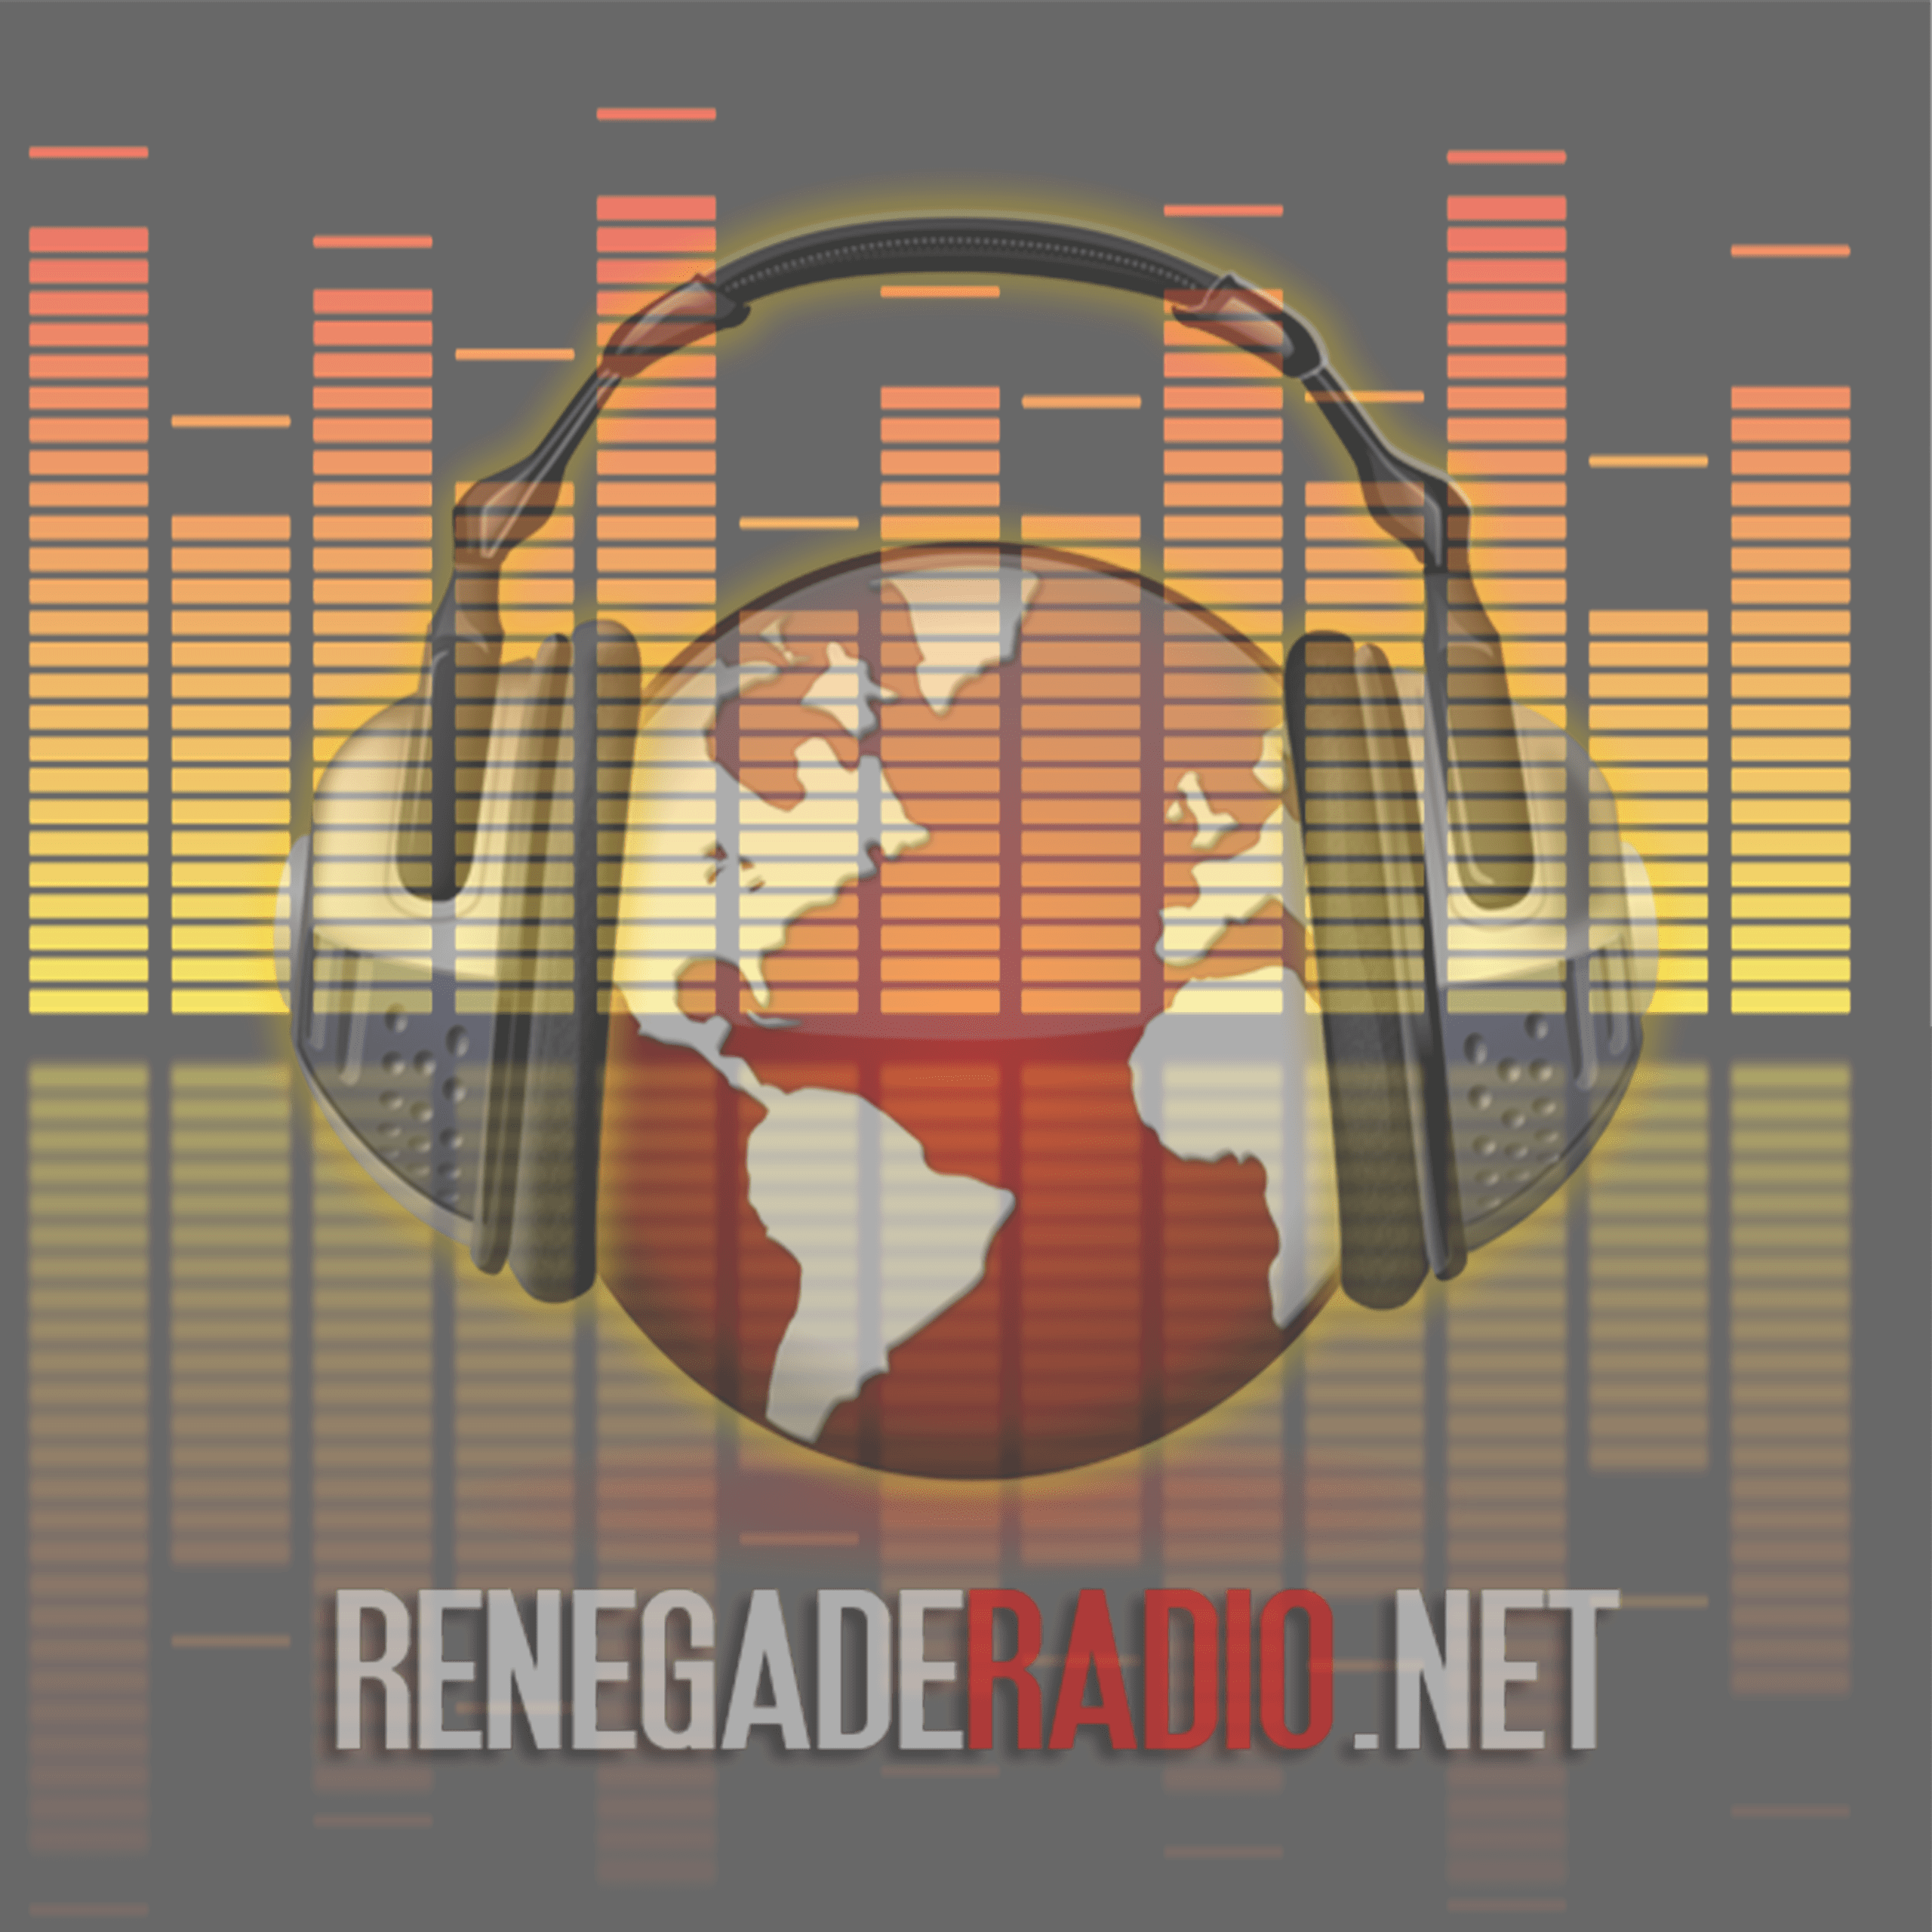 welcome to renegade radio, we hope you enjoy your stay